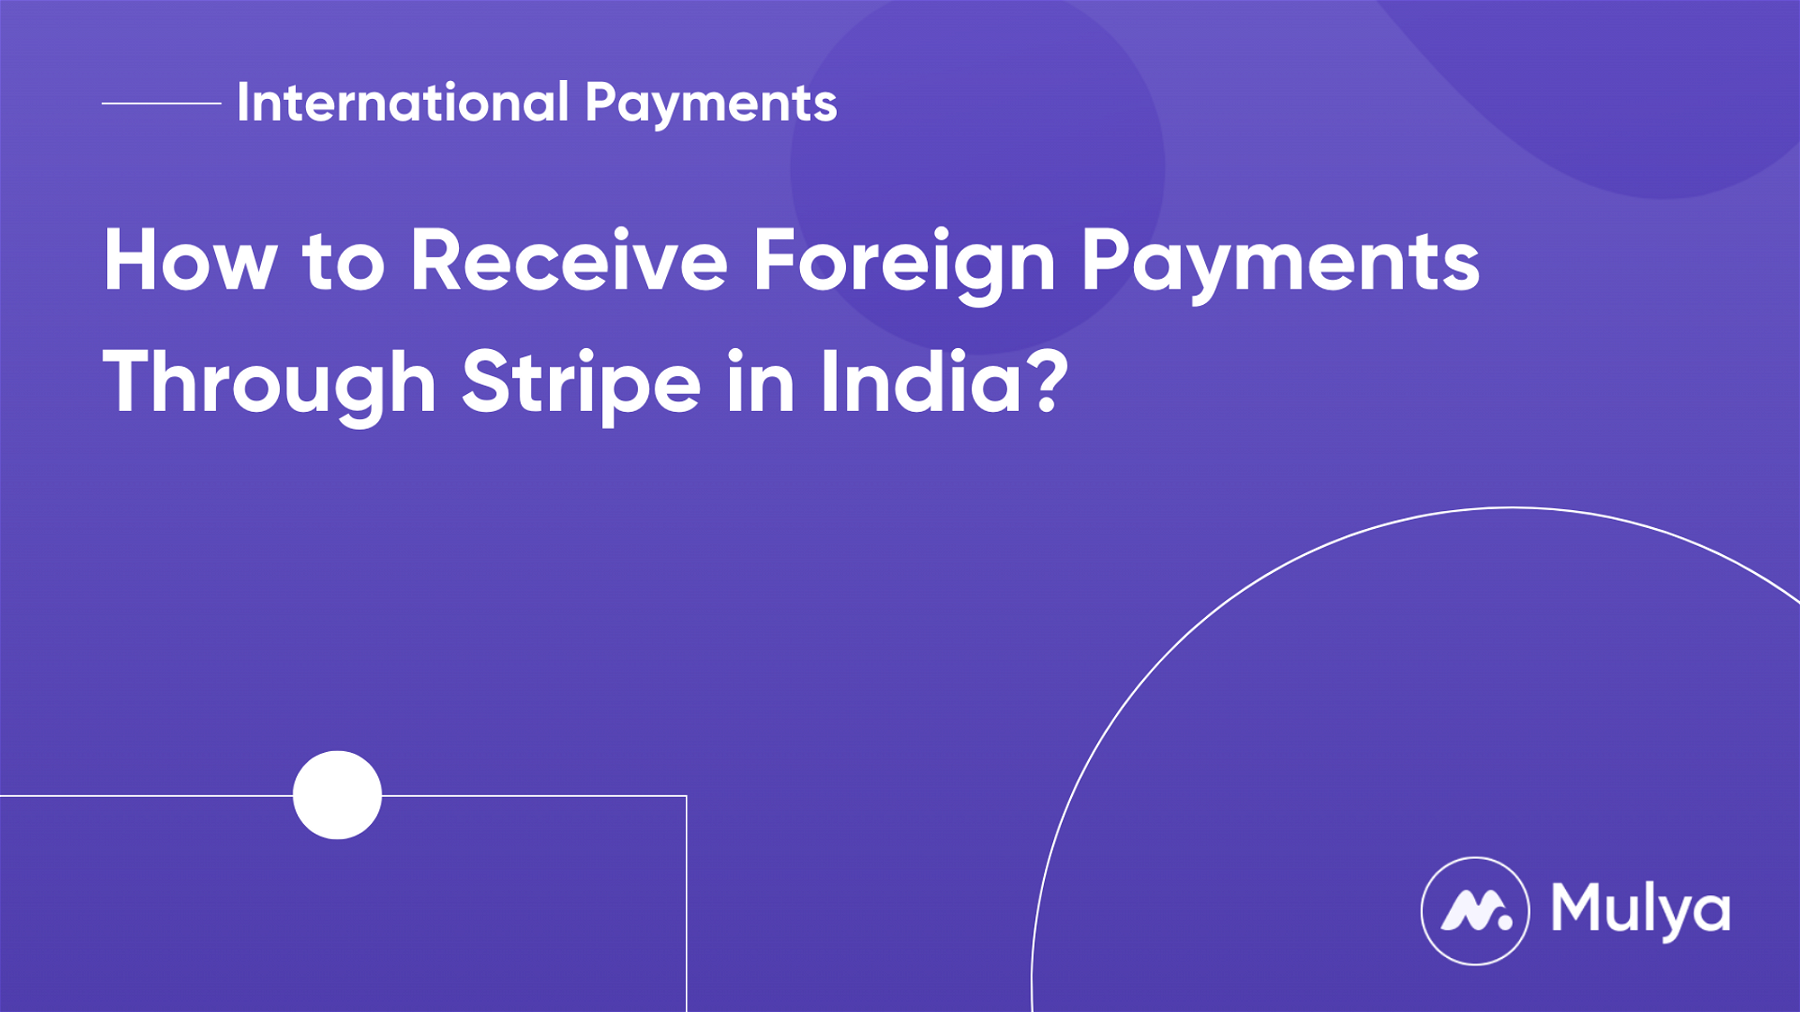 How to Receive Foreign Payments Through Stripe in India?